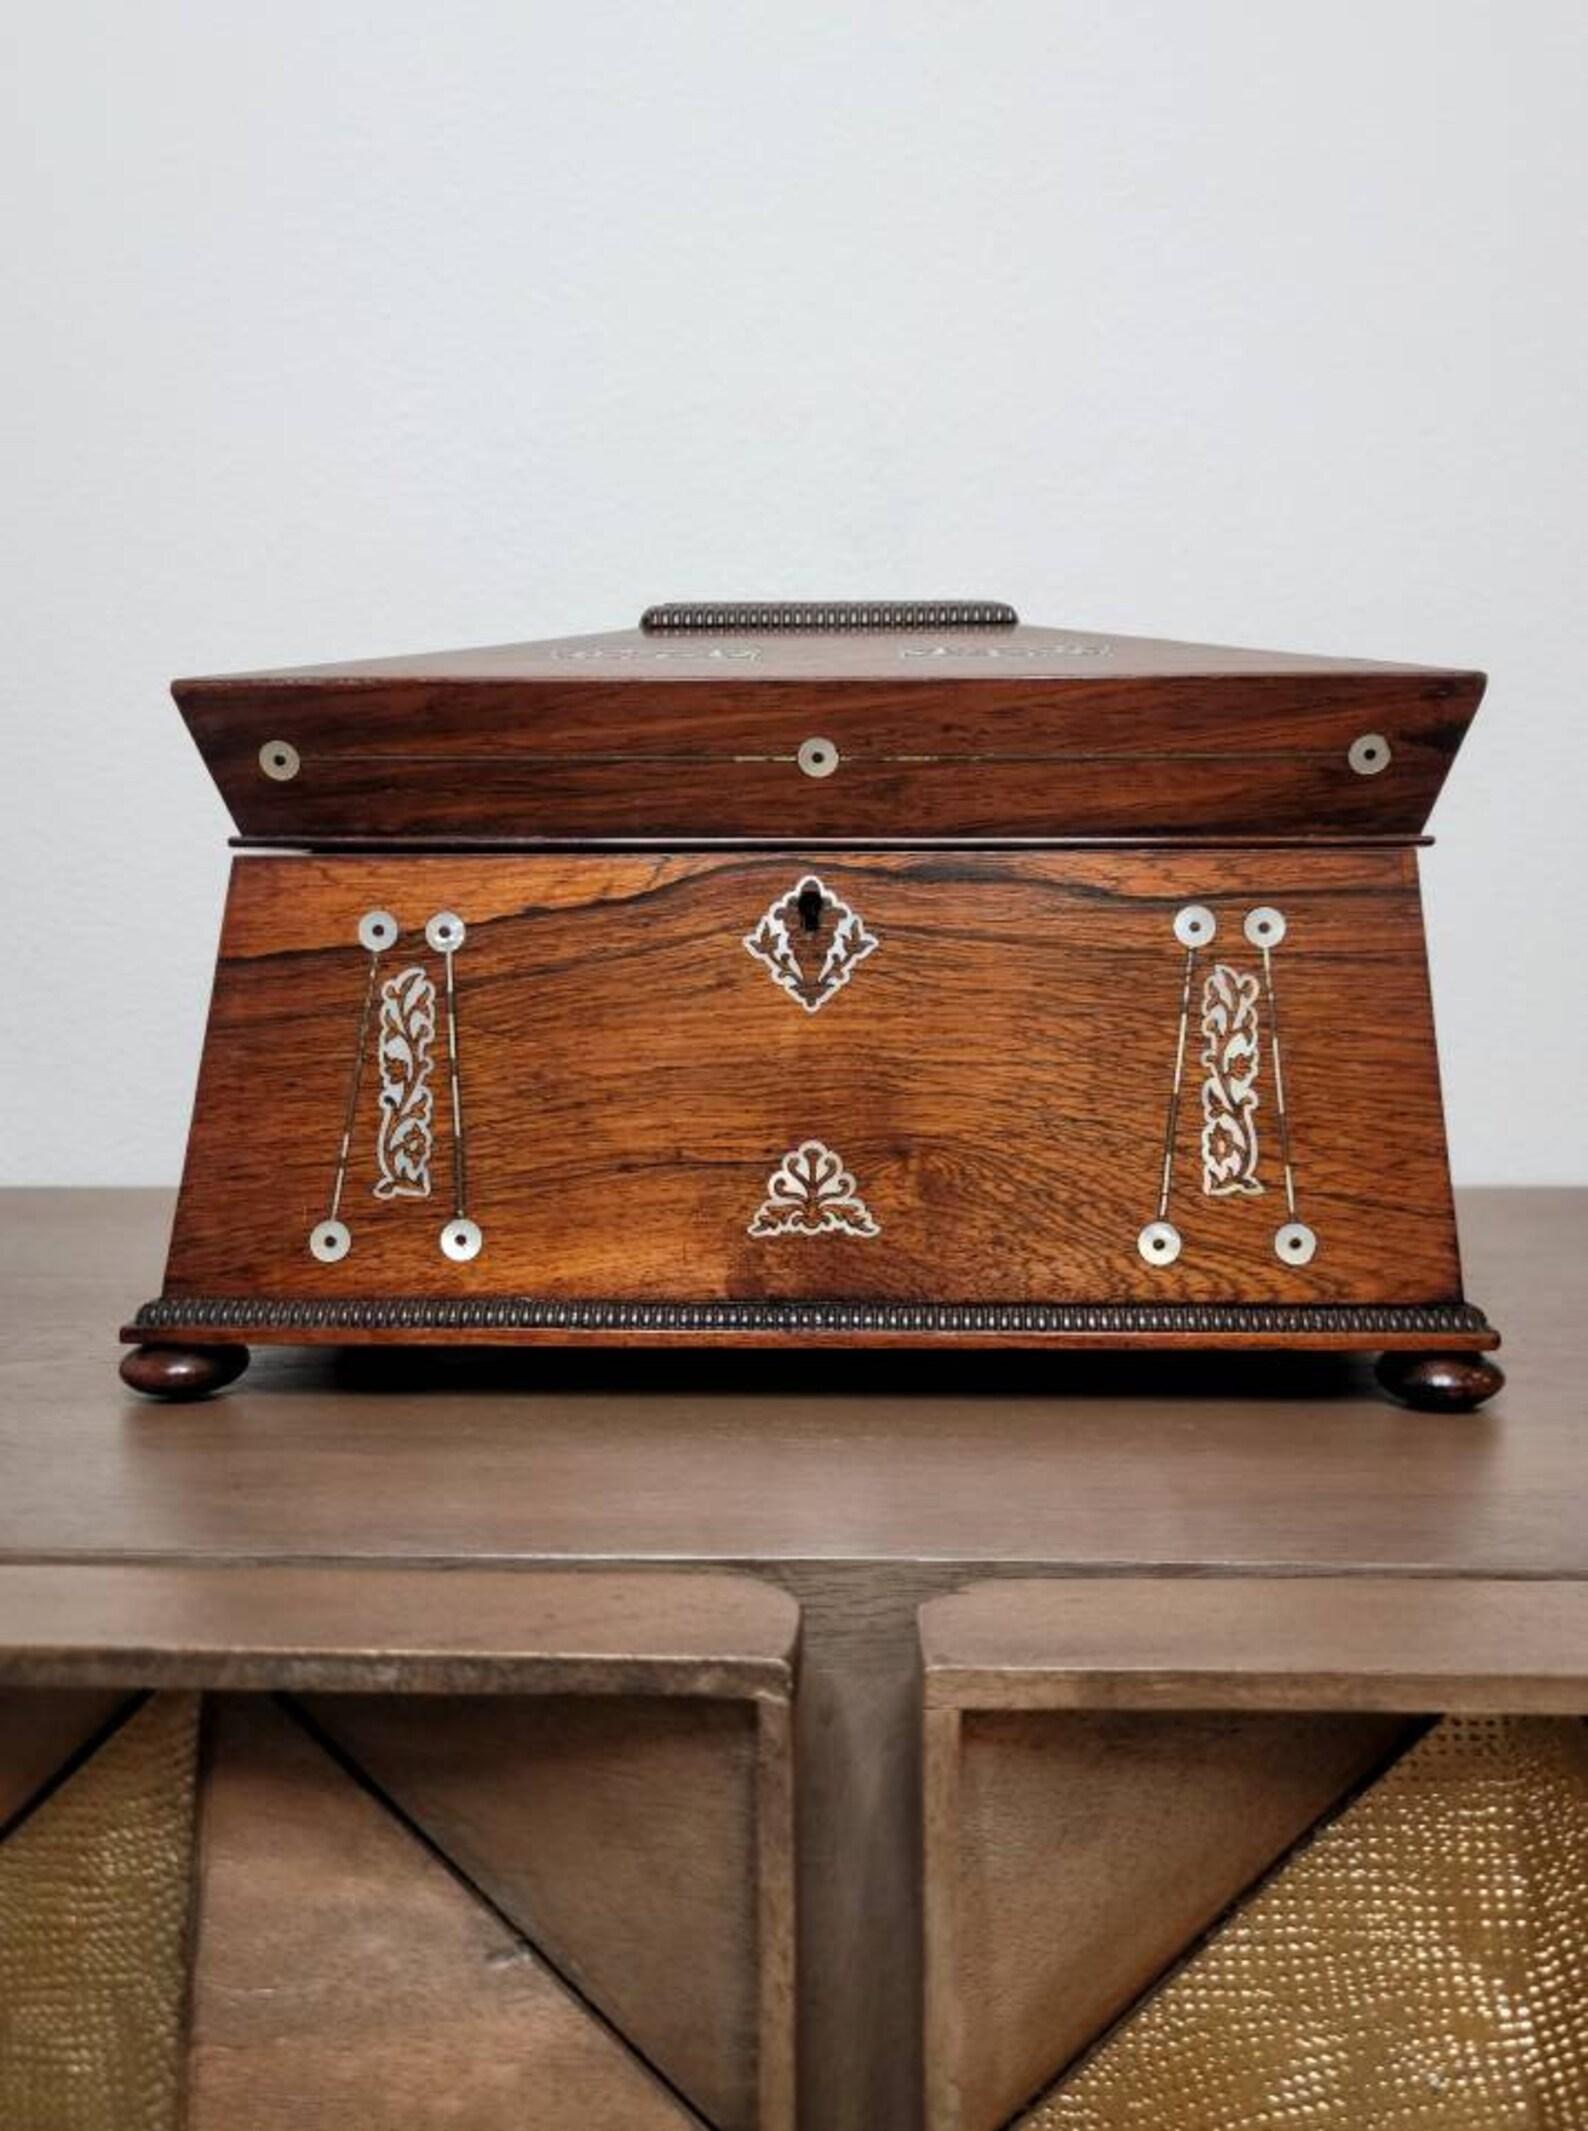 An elegant fine quality English Regency period tea caddy. Circa 1815

Born in the early 19th century, exquisitely hand-crafted from the finest exotic rosewood, rectangular sarcophagus-form case with stunning mother-of-pearl inlay, wooden ring